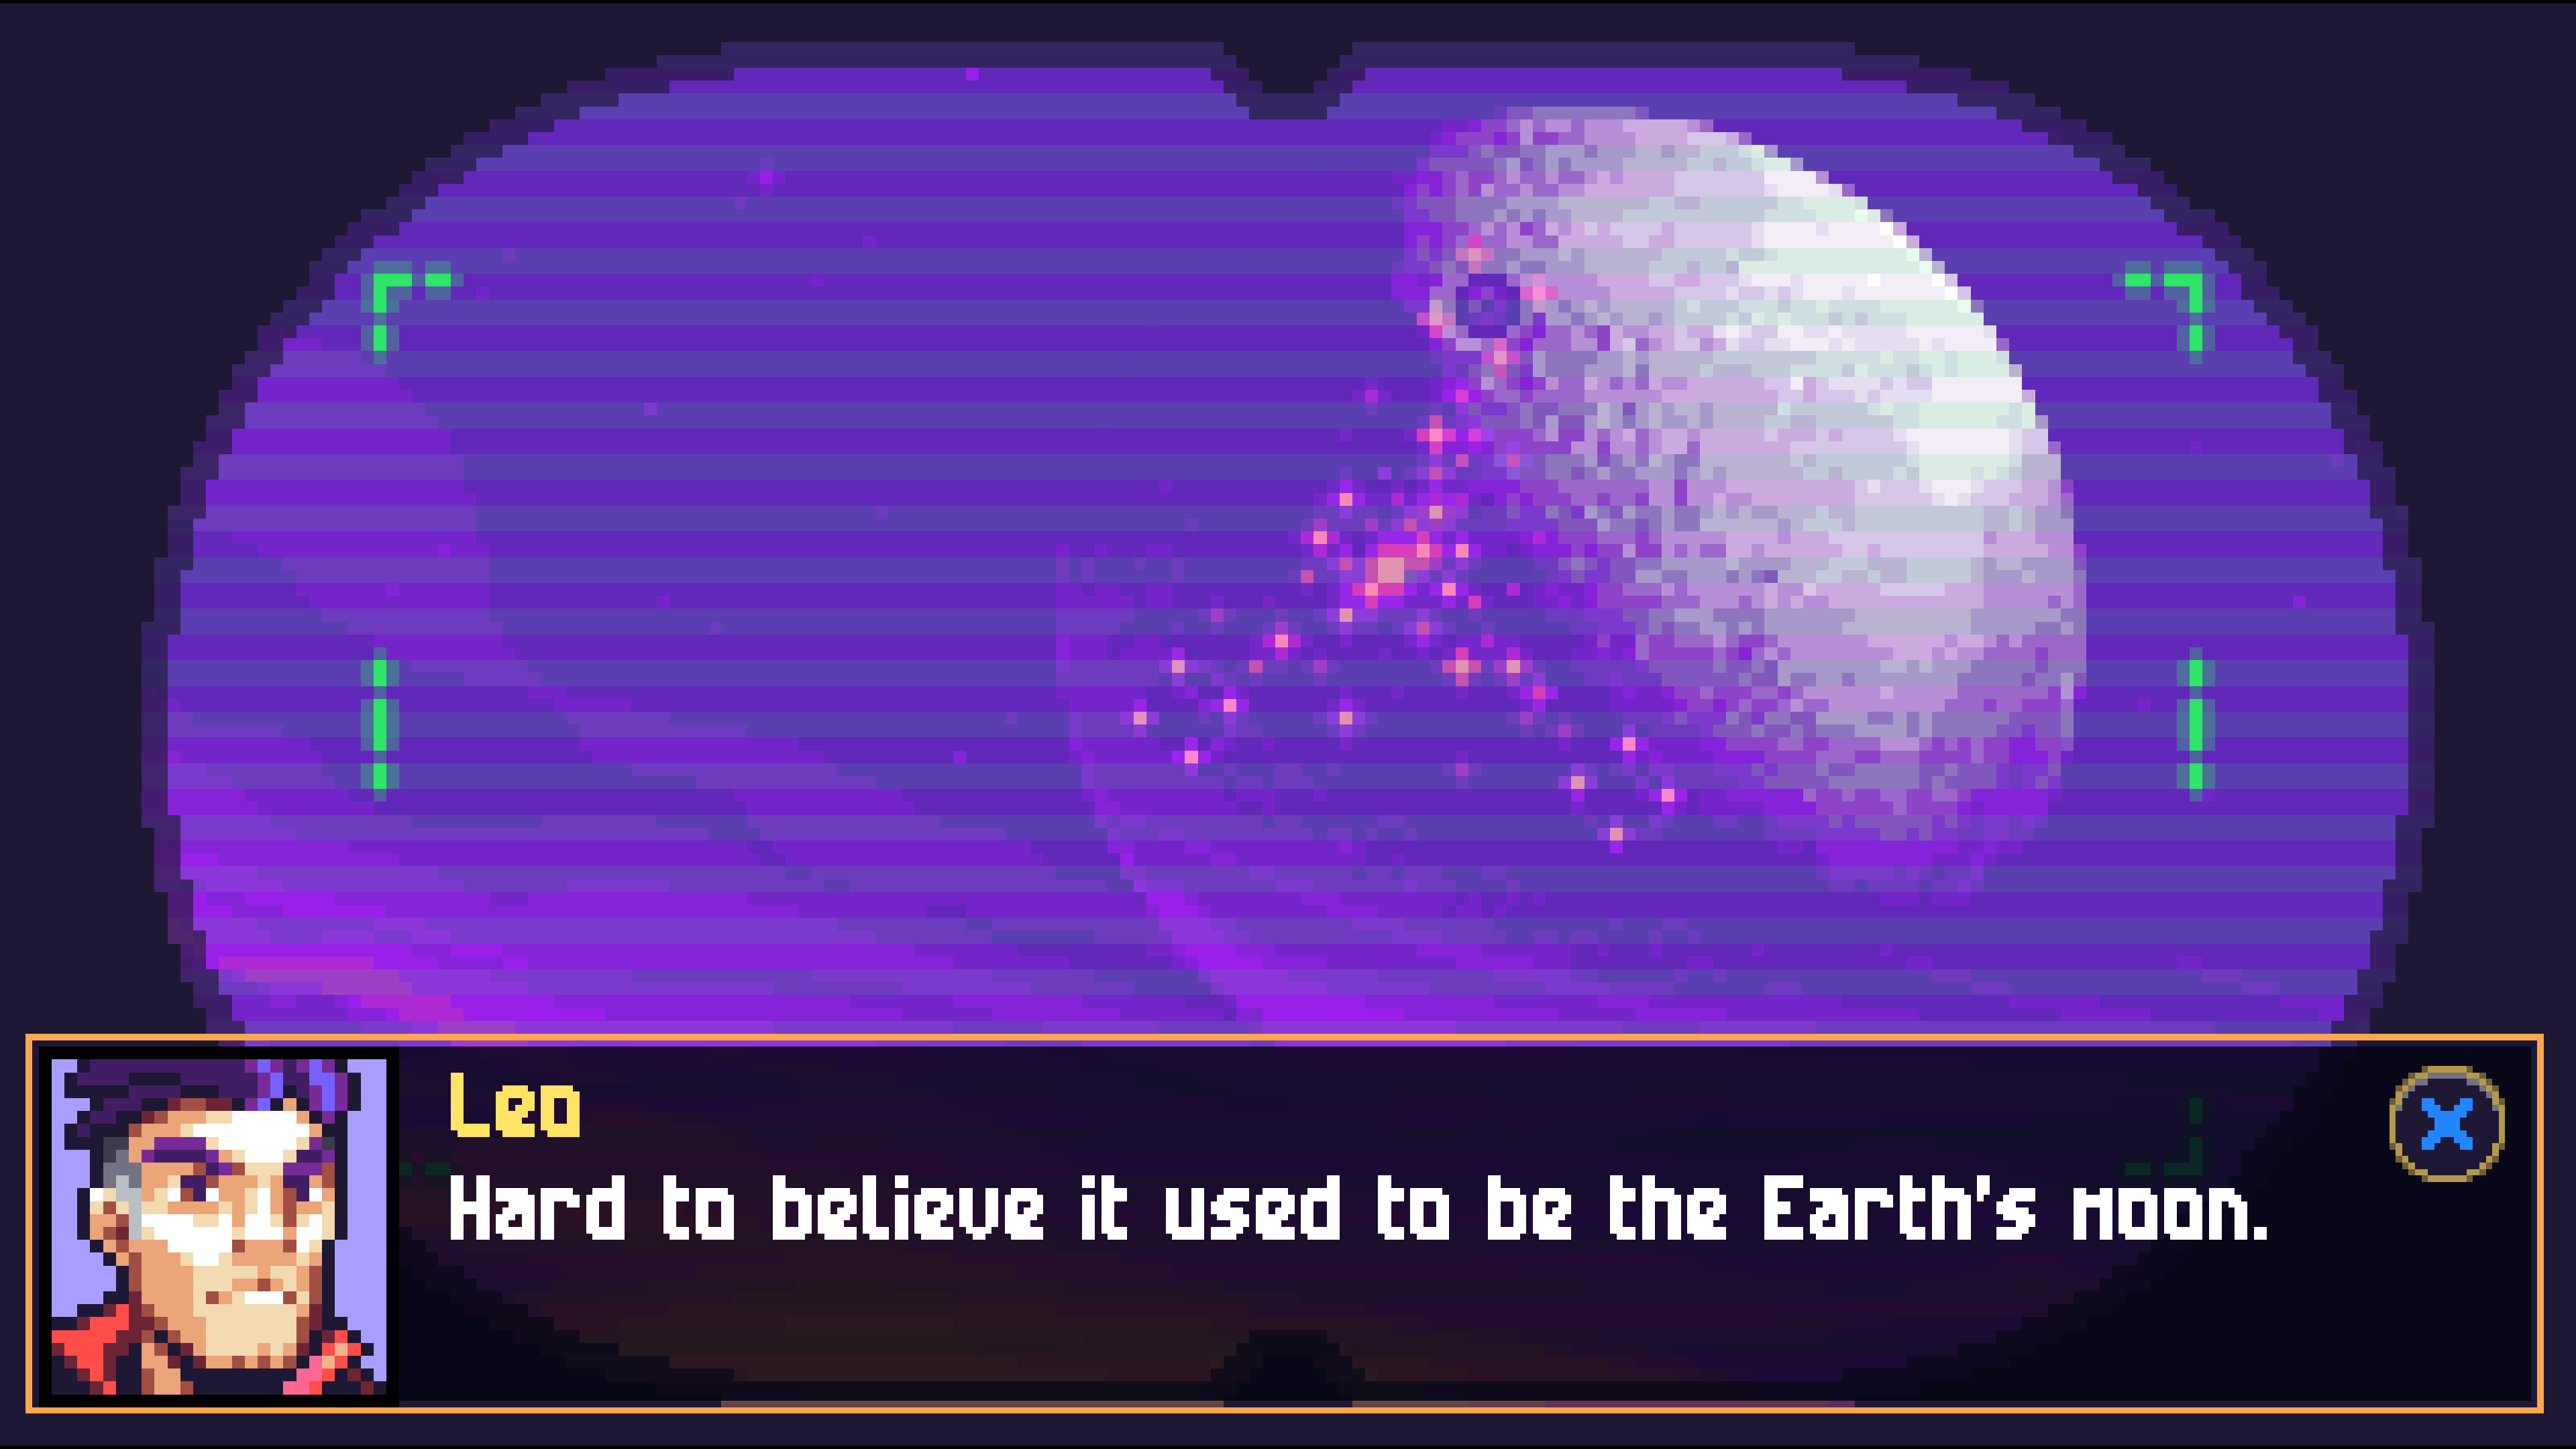 a view through binoculars of the moon. It is set in a fictional future where the moon has been inhabited. The bottom of the image shows dialogue from a character called Leo that reads: "Hard to believe it used to be the Earth's moon."